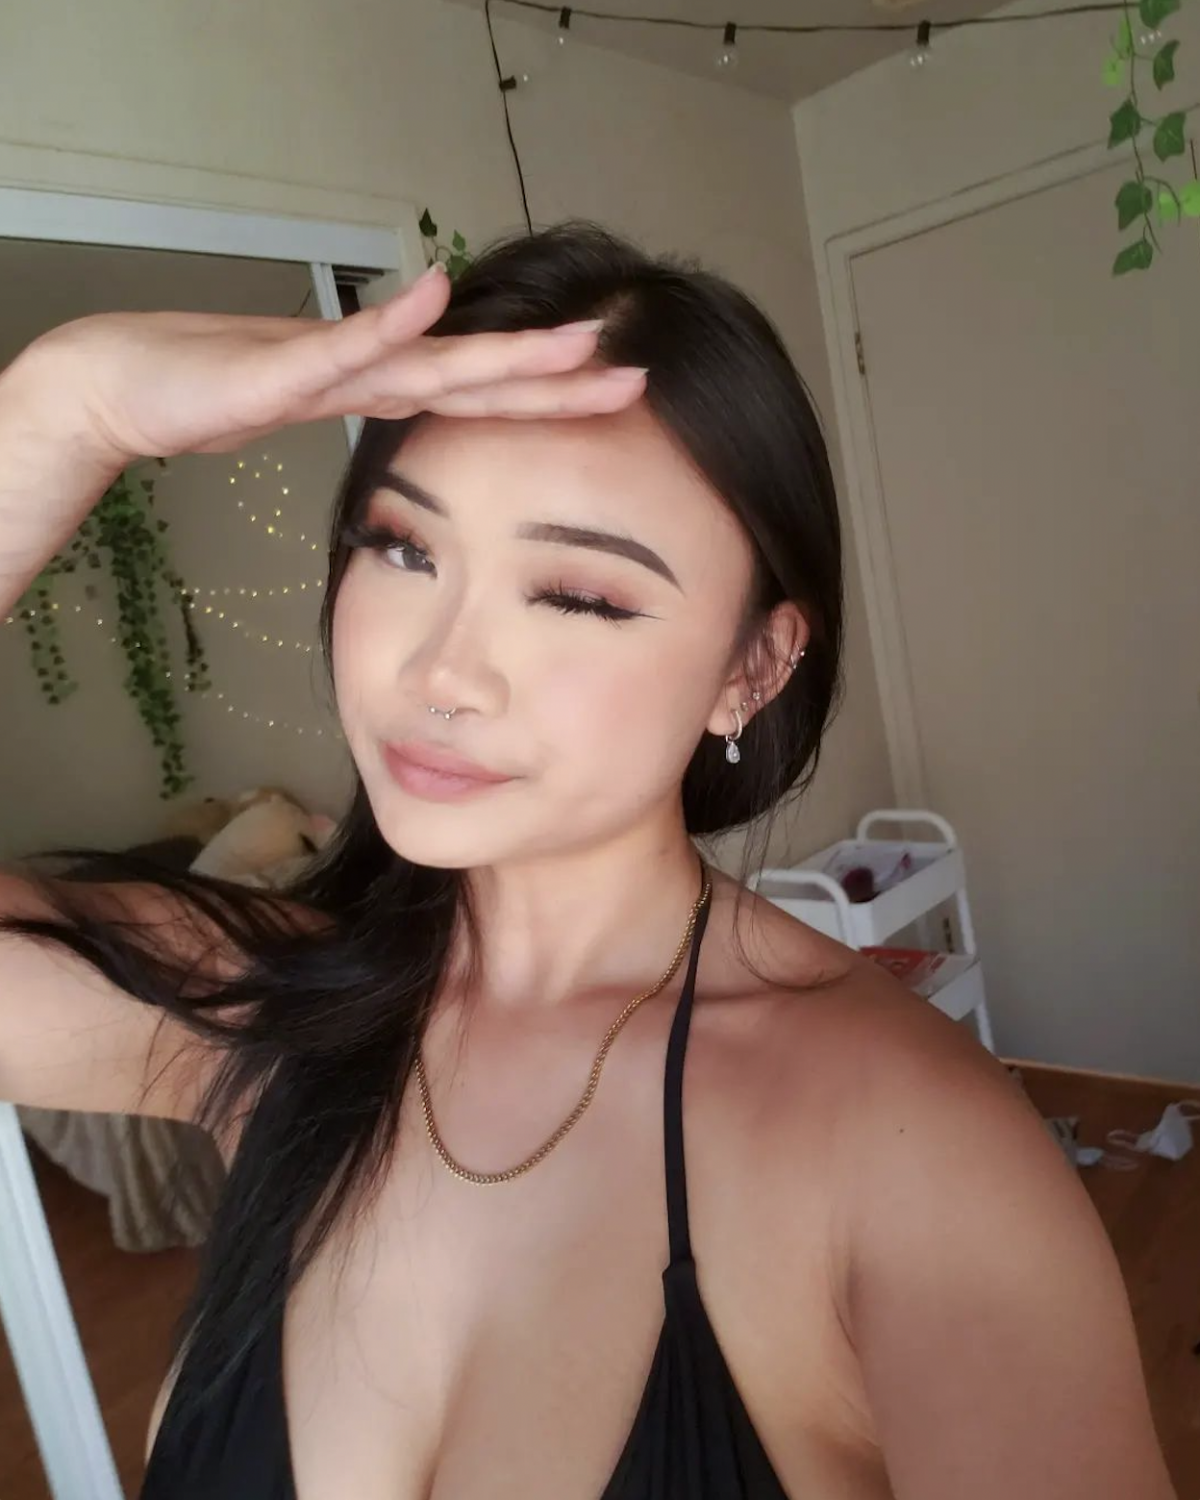 Big Tittied Viet Bitch Takes A Hot Load On Her Face #HWwjVXoO